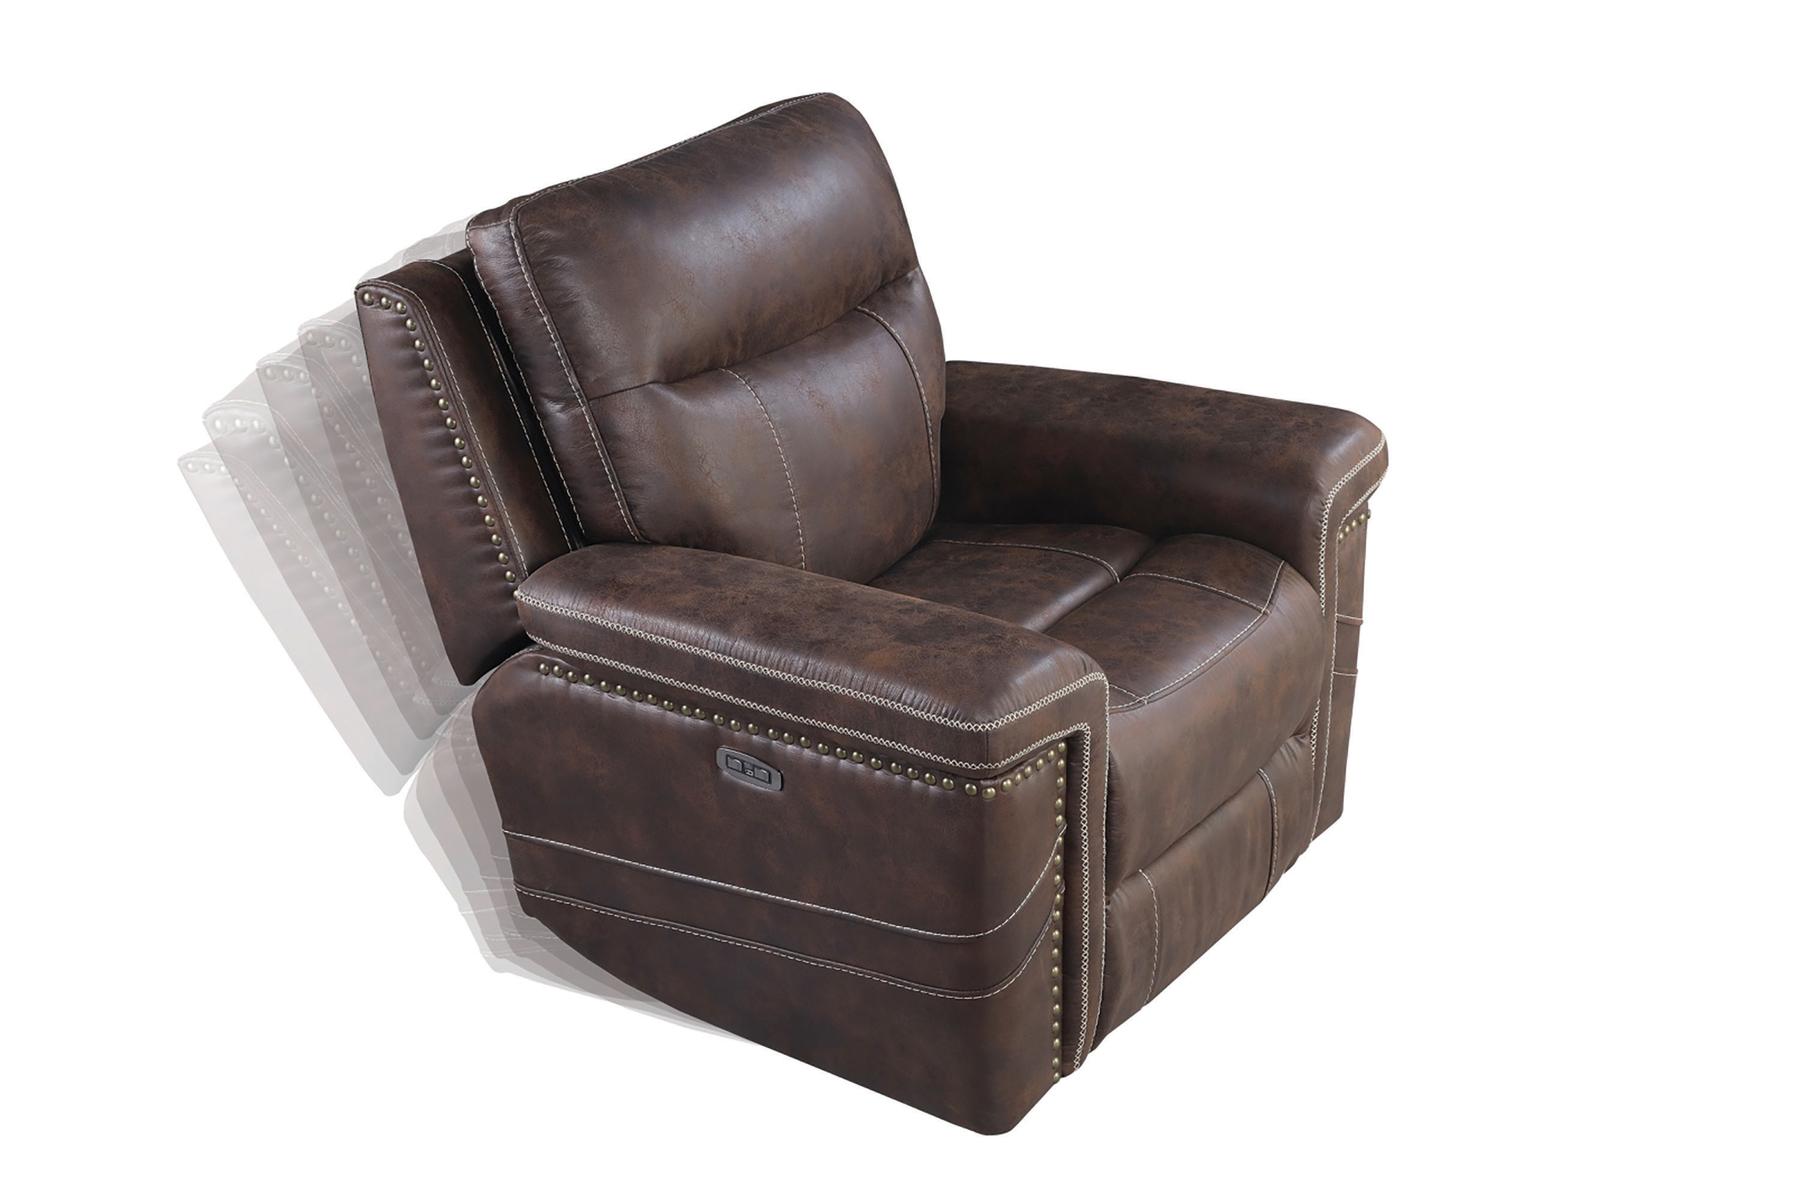 

    
Coaster 603513PP Wixom Power recliner Brown 603513PP
